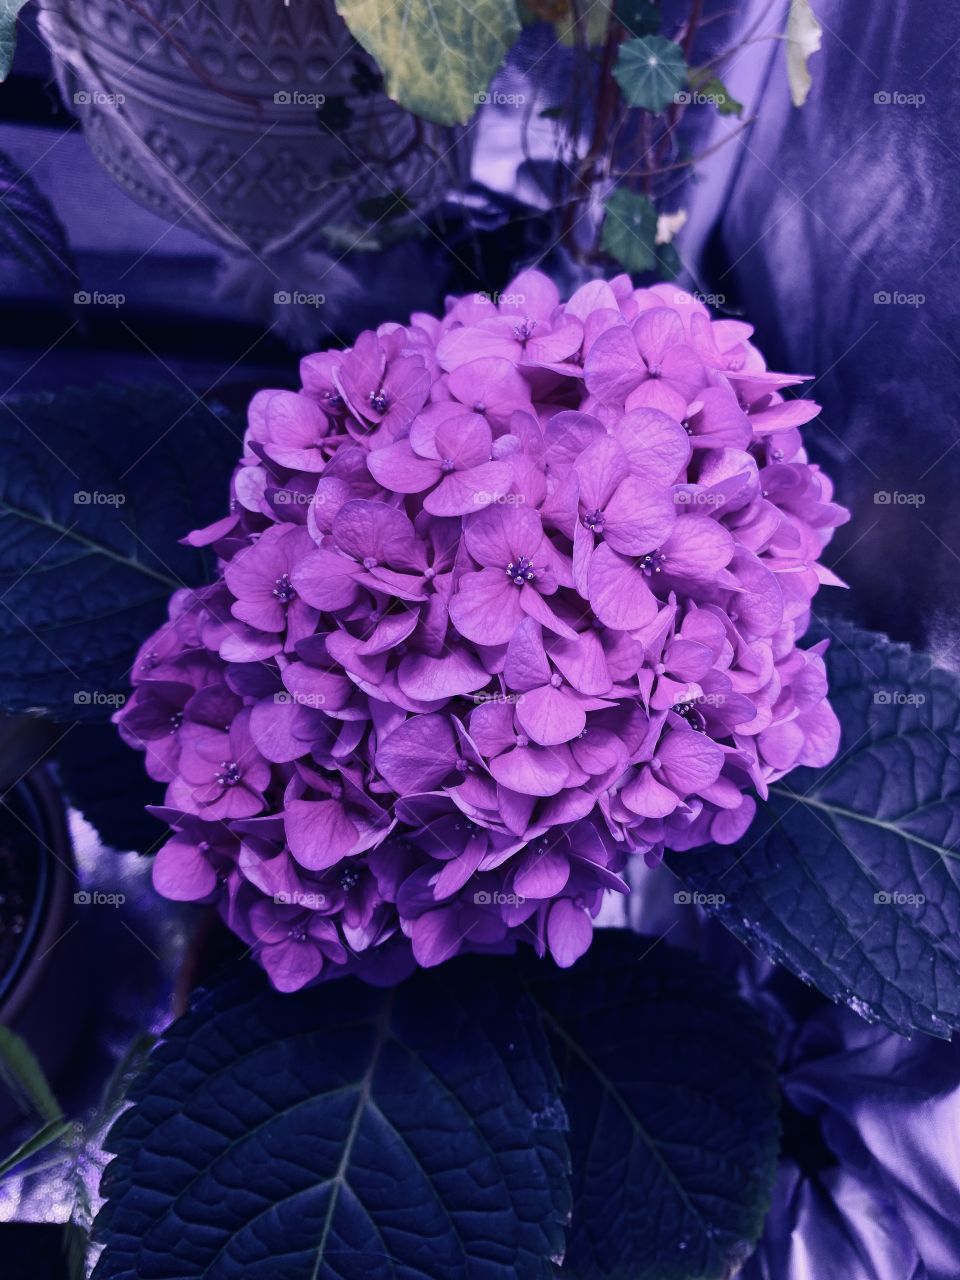 Big beautiful pink hydrangea blooming and thriving in the middle of winter thanks to my grow tent used for indoor gardening